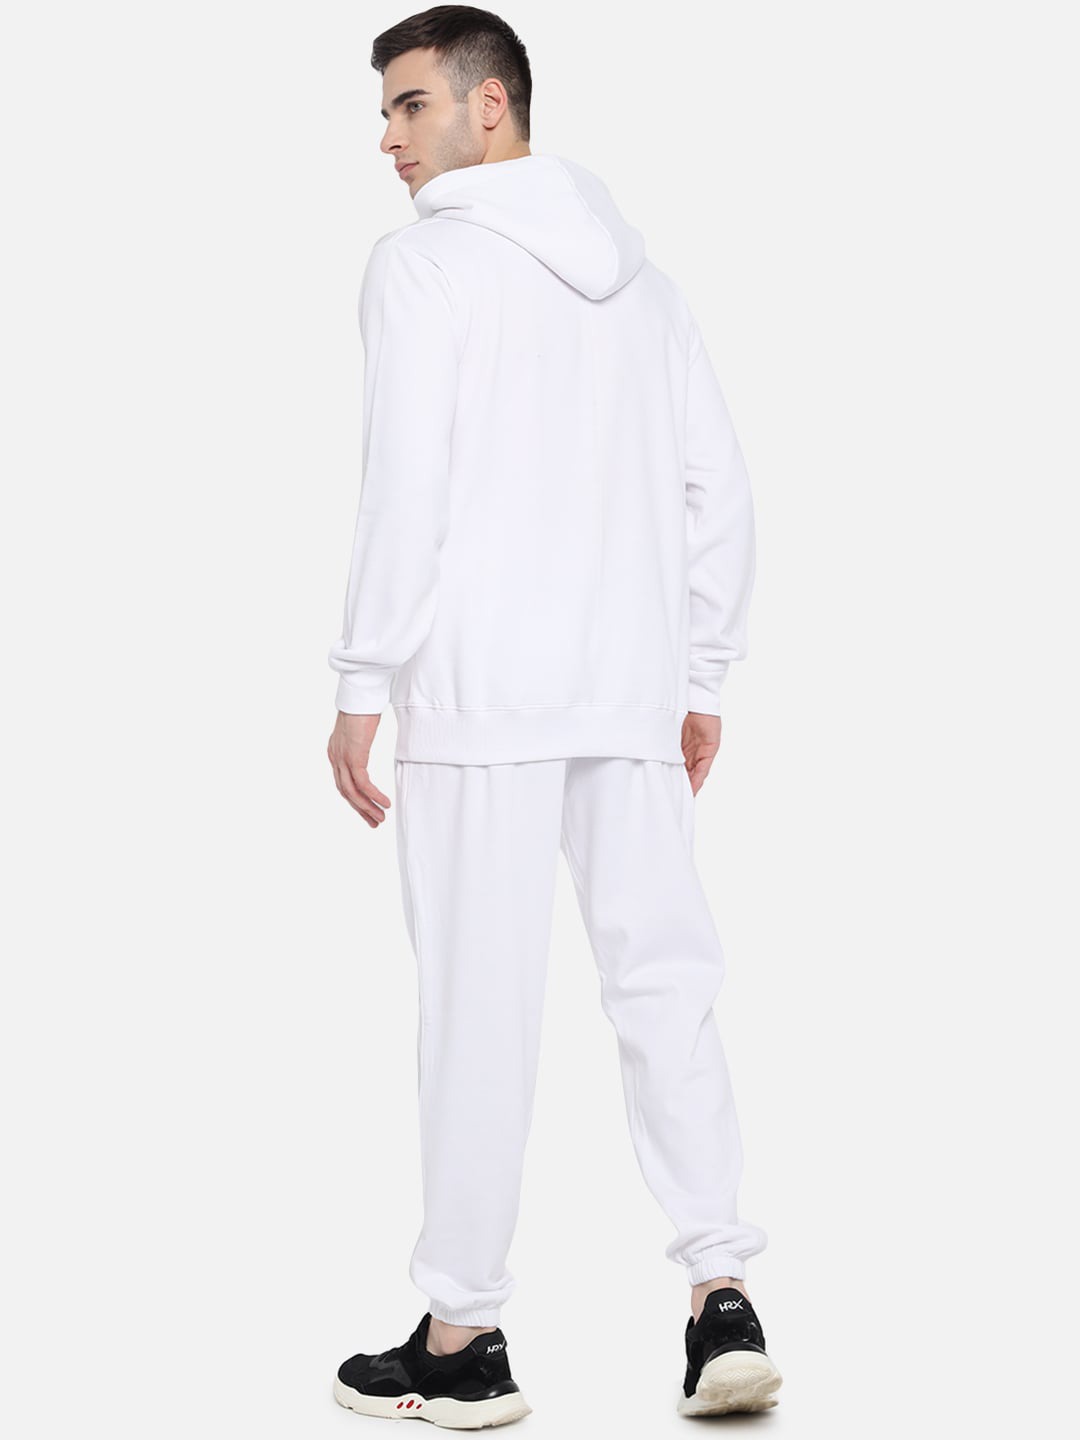 Clothing Tracksuits | GRIFFEL Men White Solid Cotton Tracksuit - HF56735